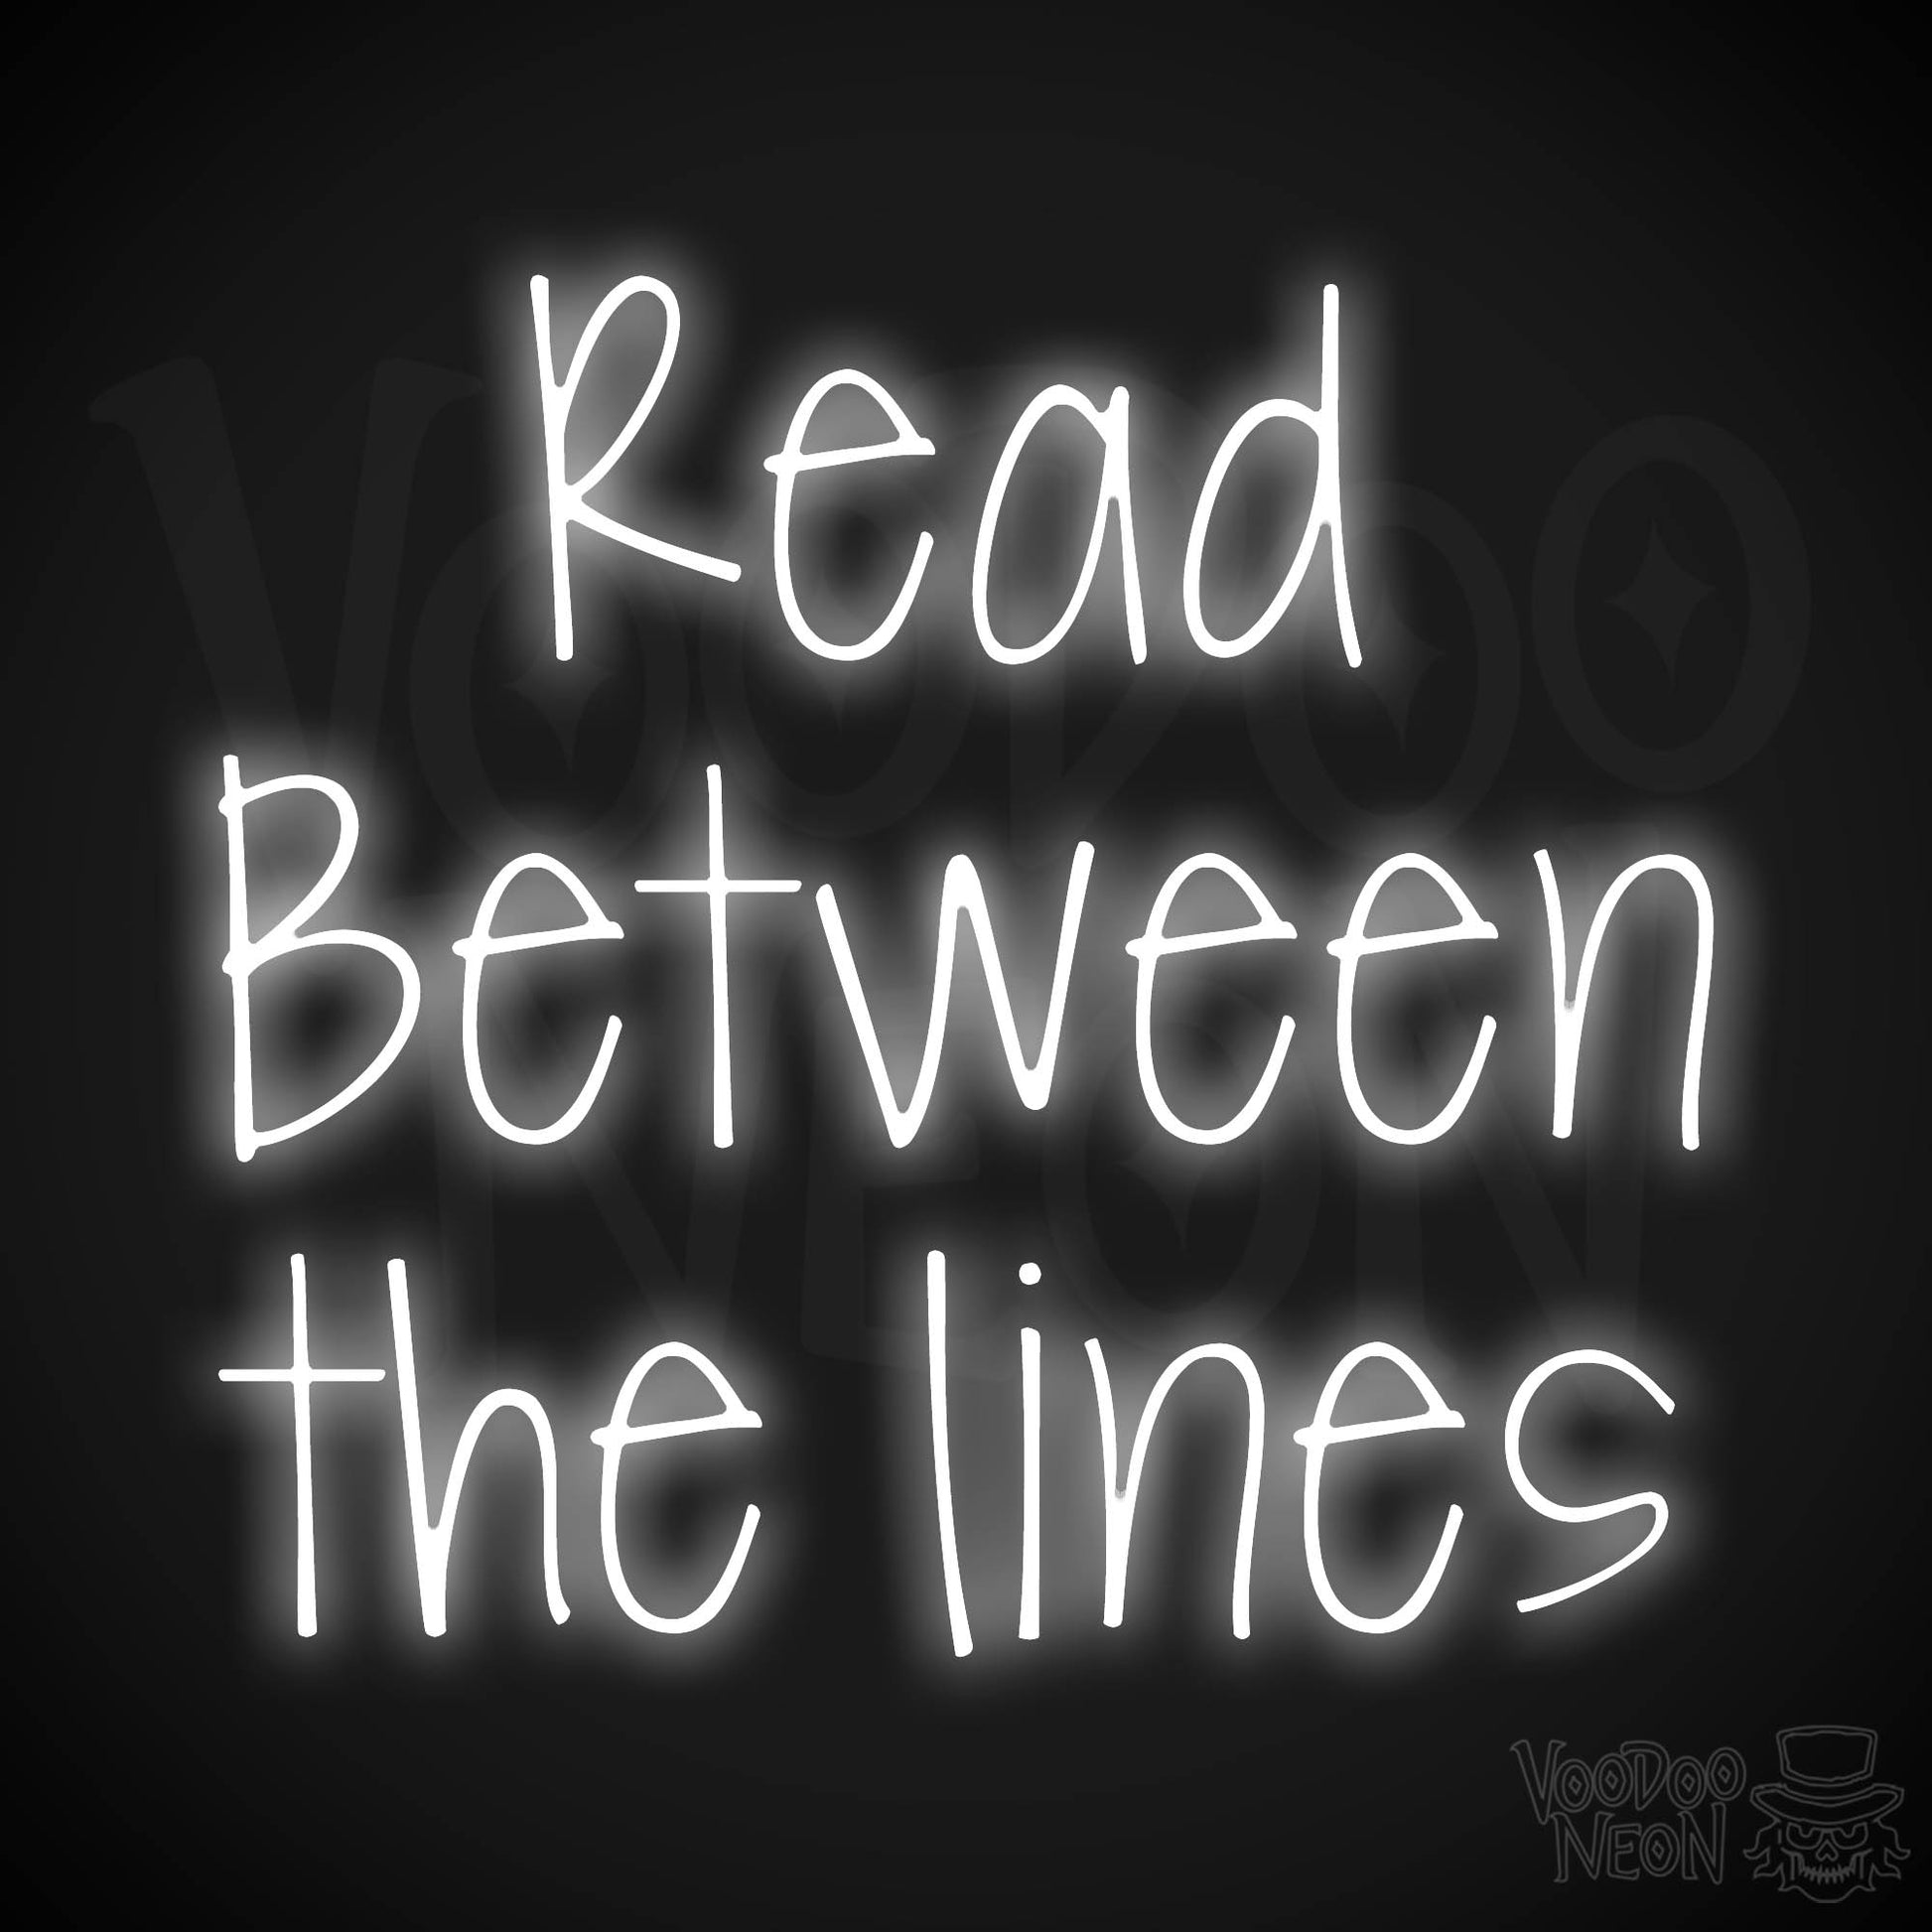 Read Between The Lines LED Neon - White